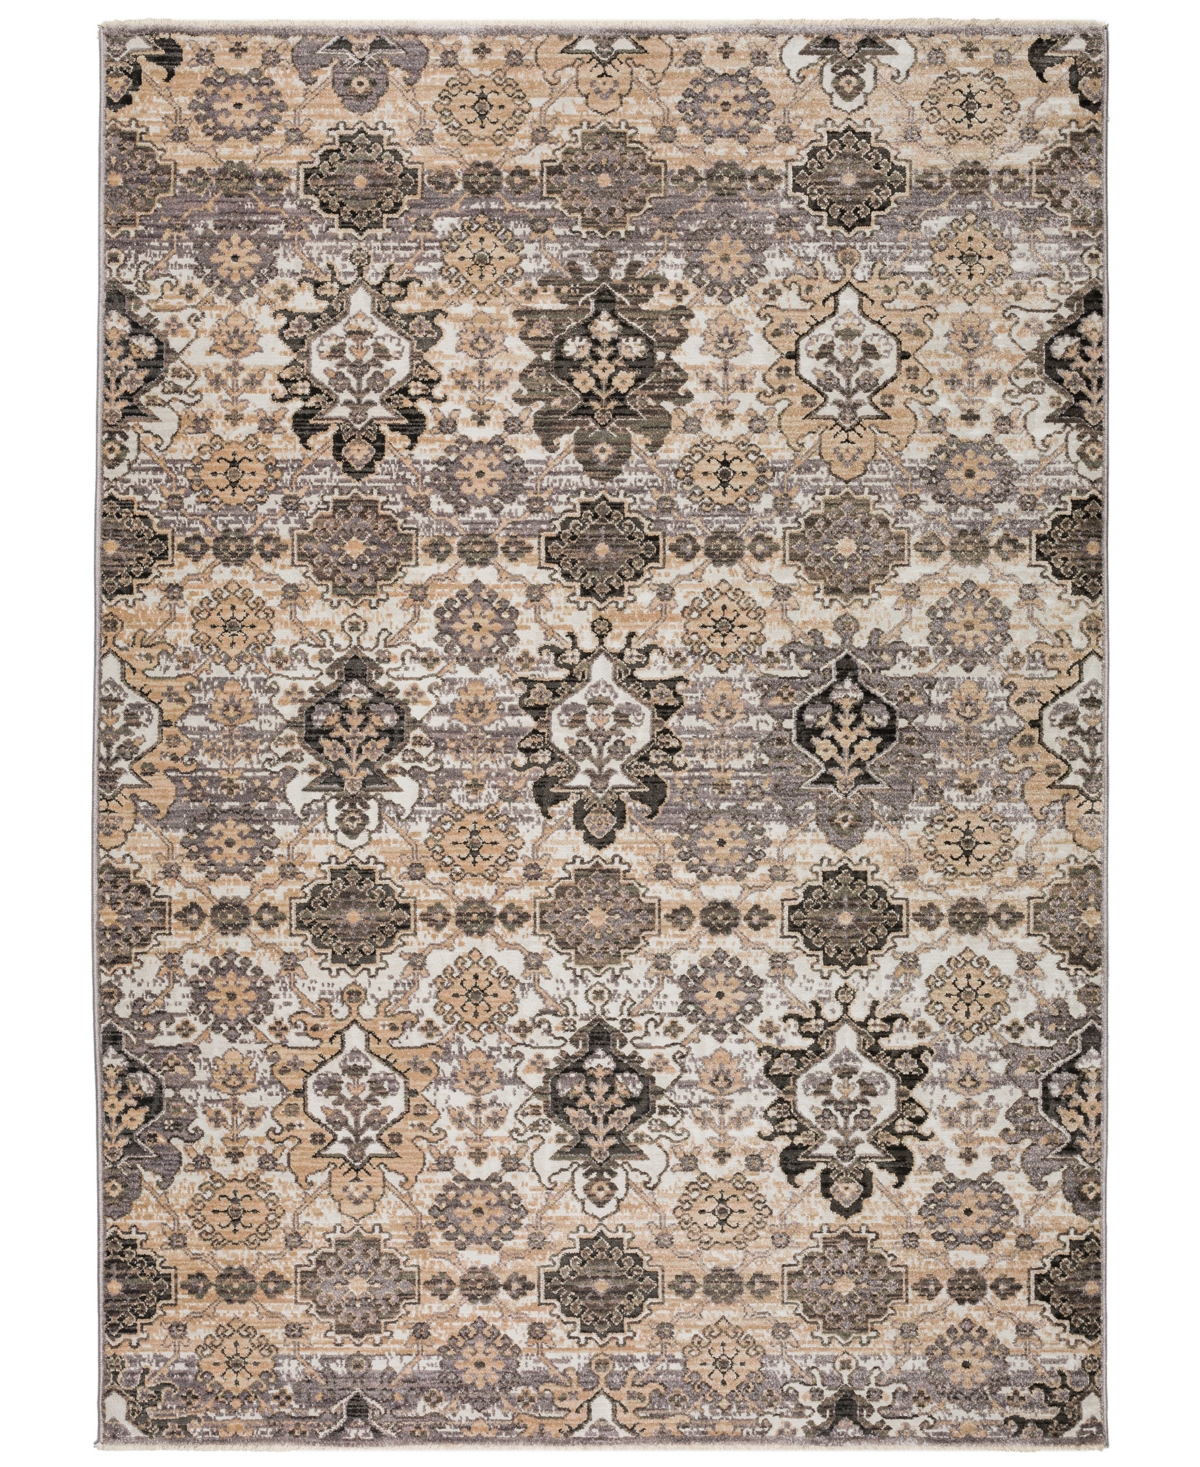 D Style Sergey Sgy7 3' X 5' Area Rug In Gray